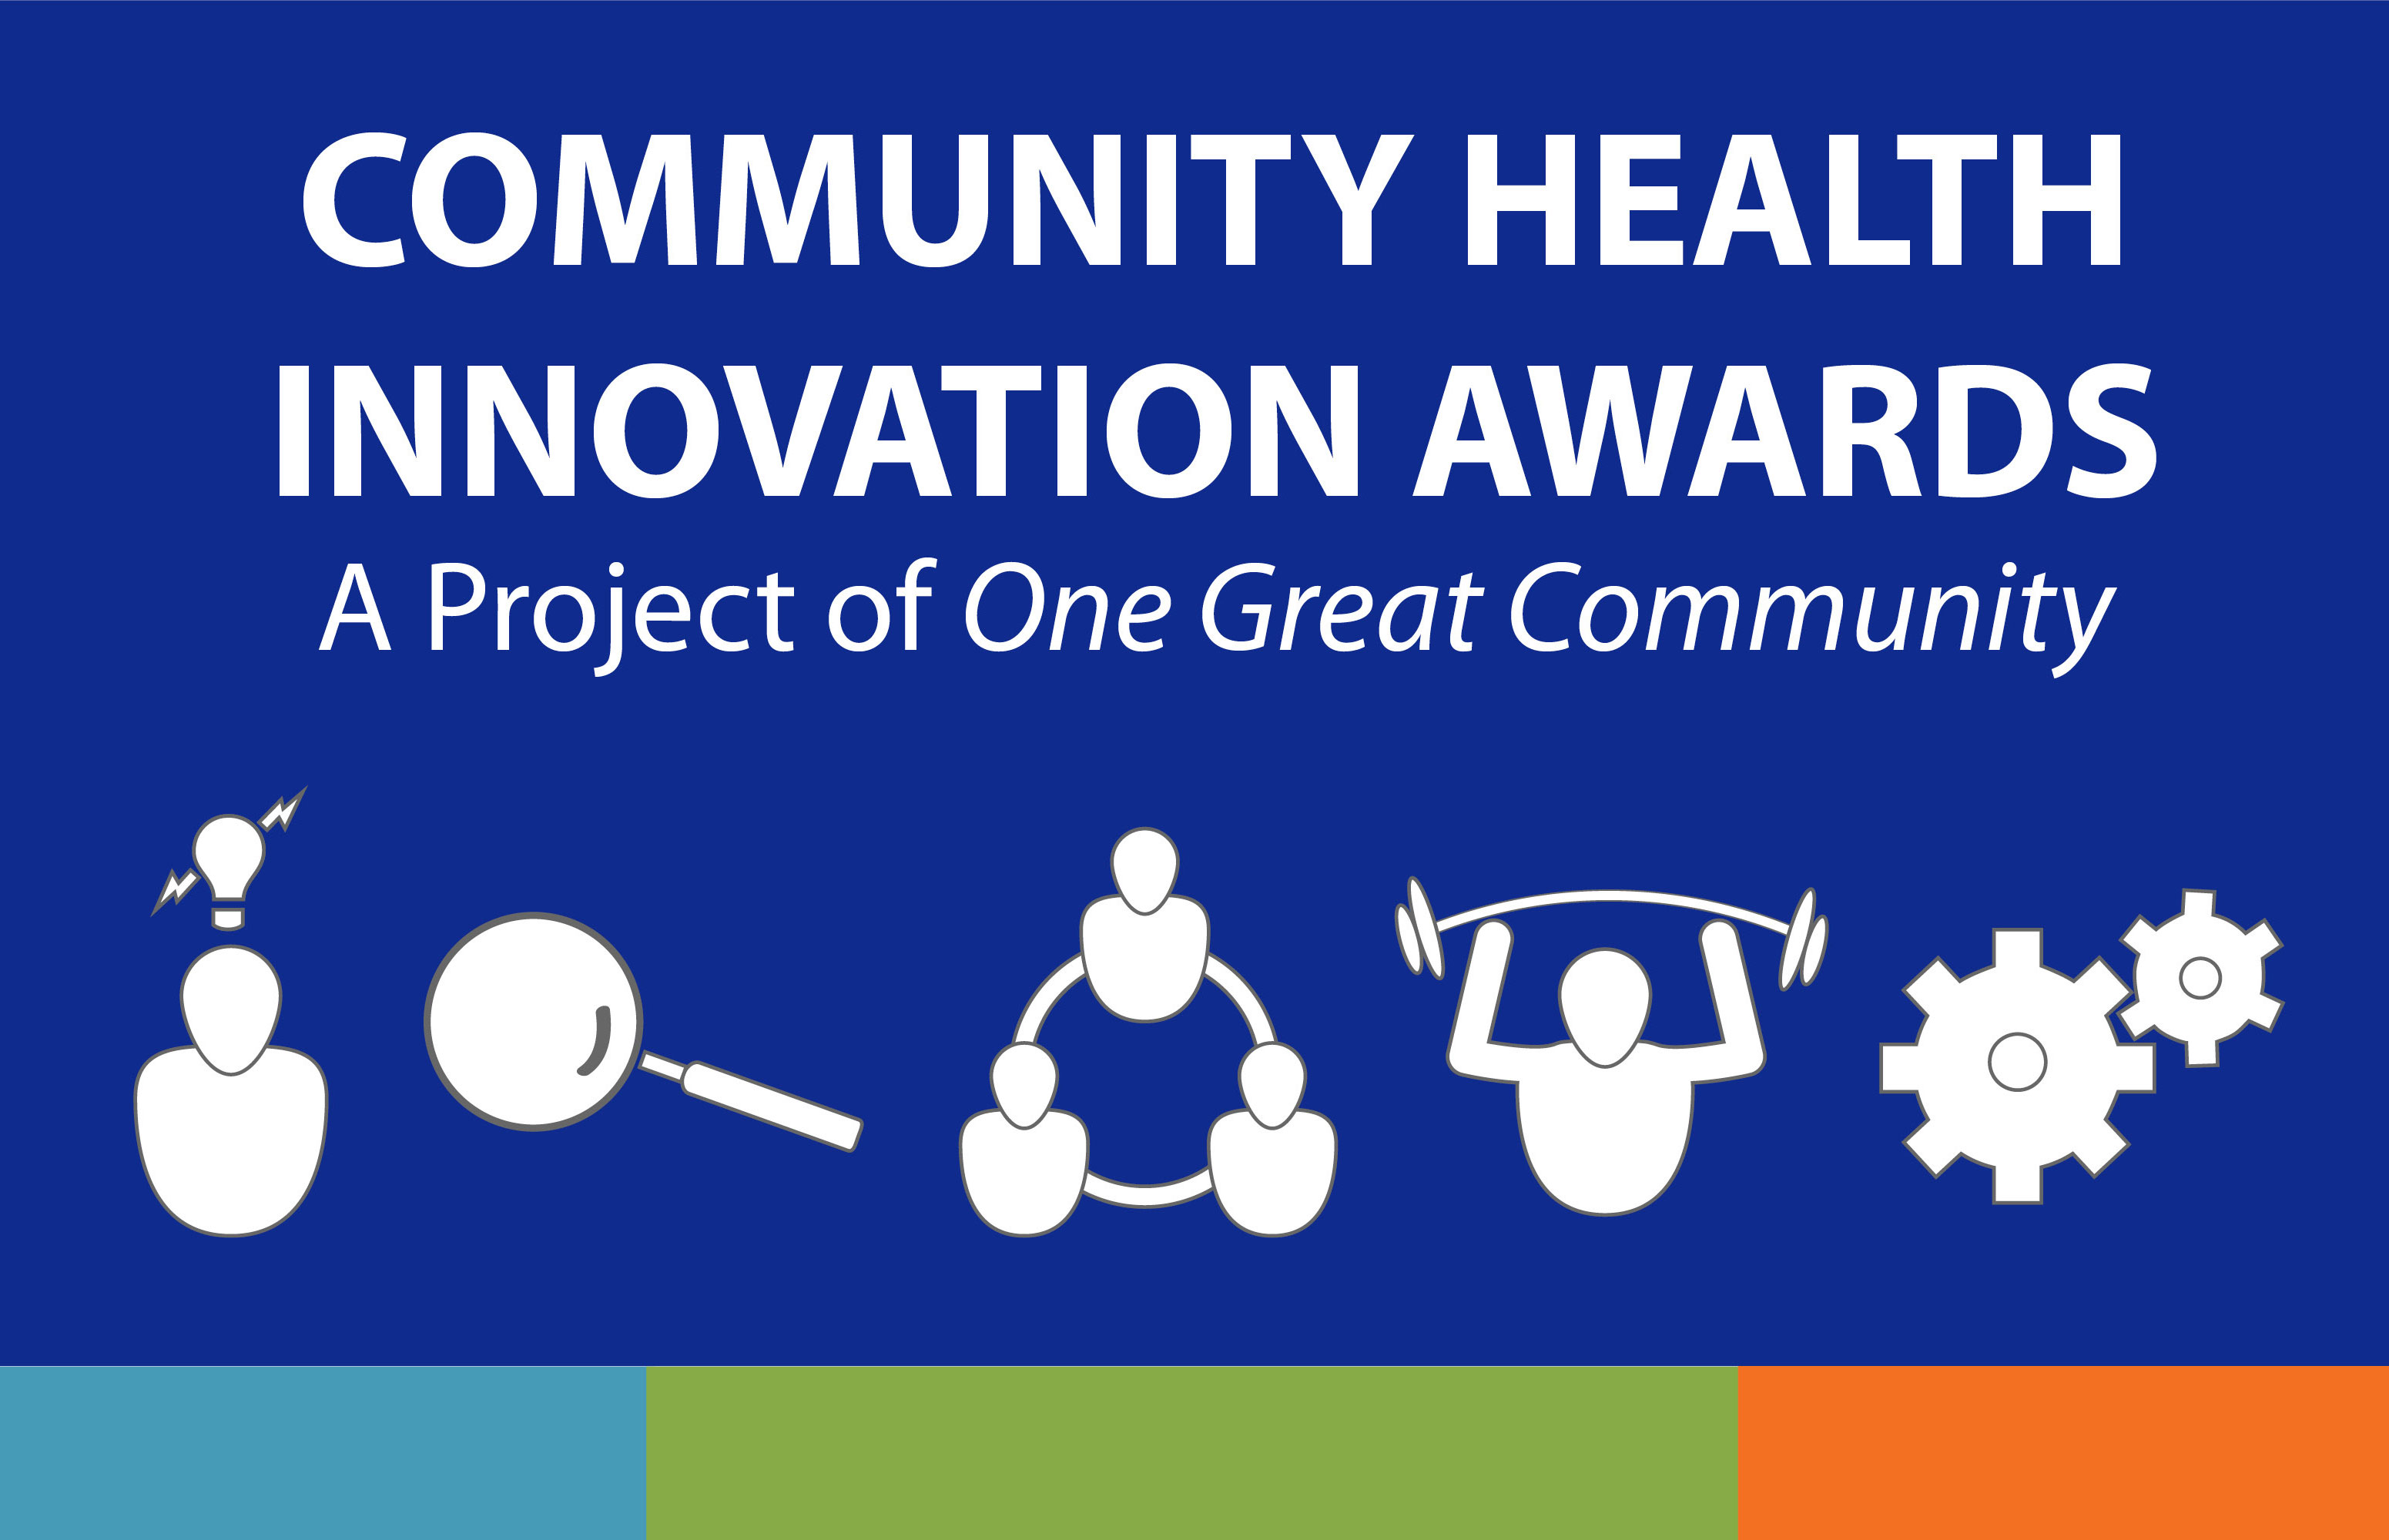 CCTS Launches 7th Annual Community Health Engagement Awards (CHIA)